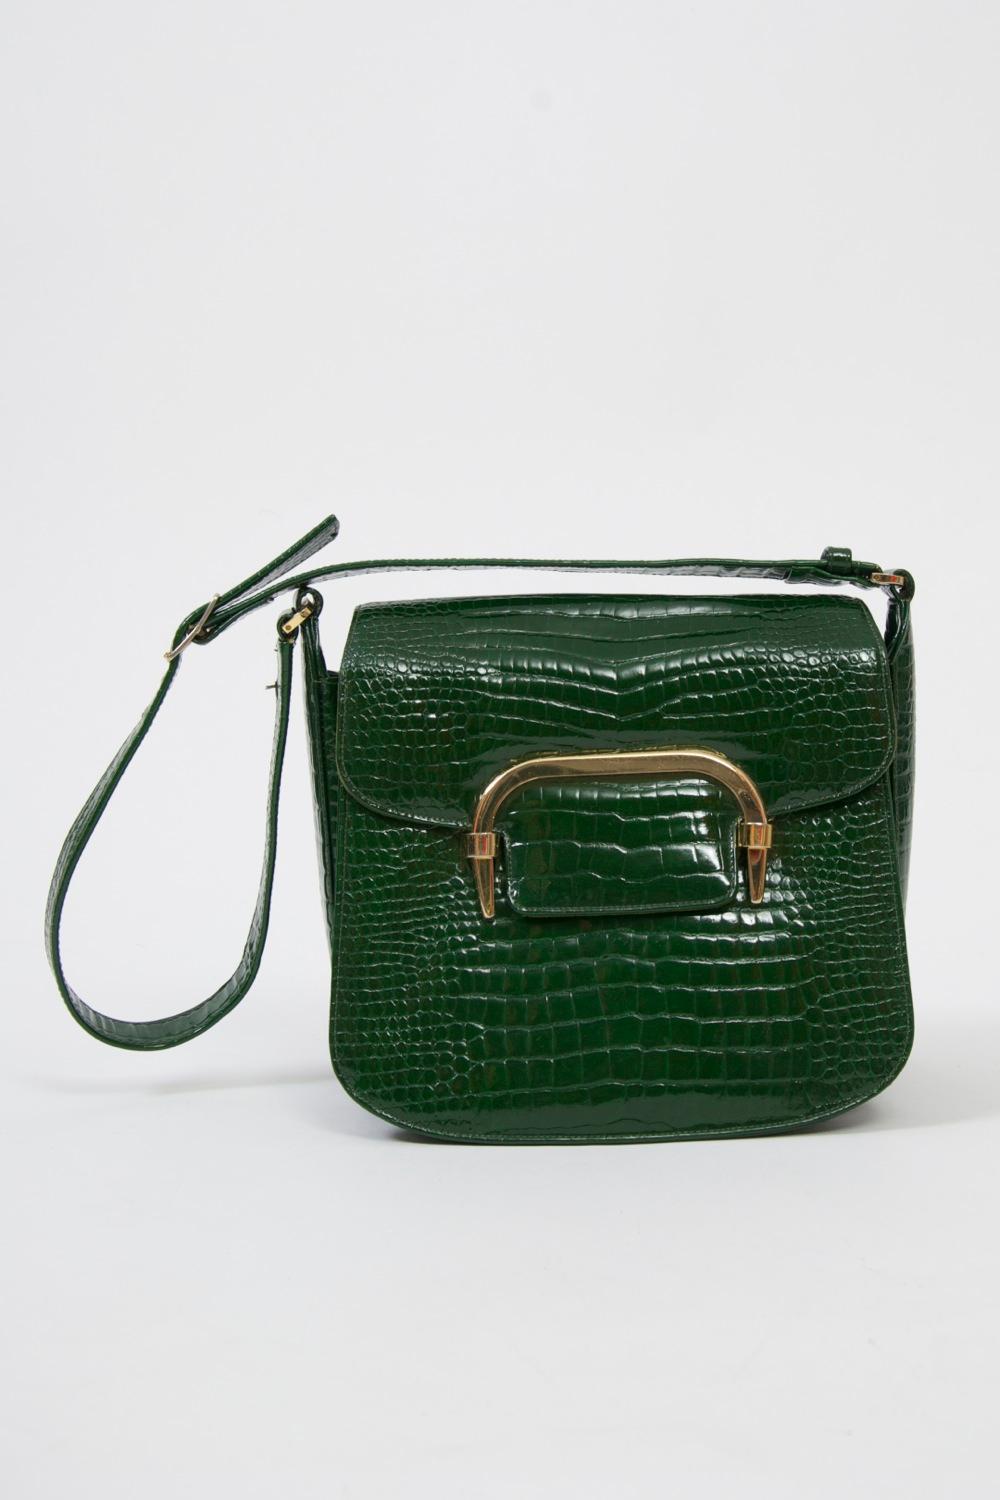 c.1970 shoulder bag in deep green, the texture pressed to simulate alligator, and featuring an interesting gold metal clasp on the flap that passes through two metal loops to close; the flap in lined in green suede. The wide interior is lined in